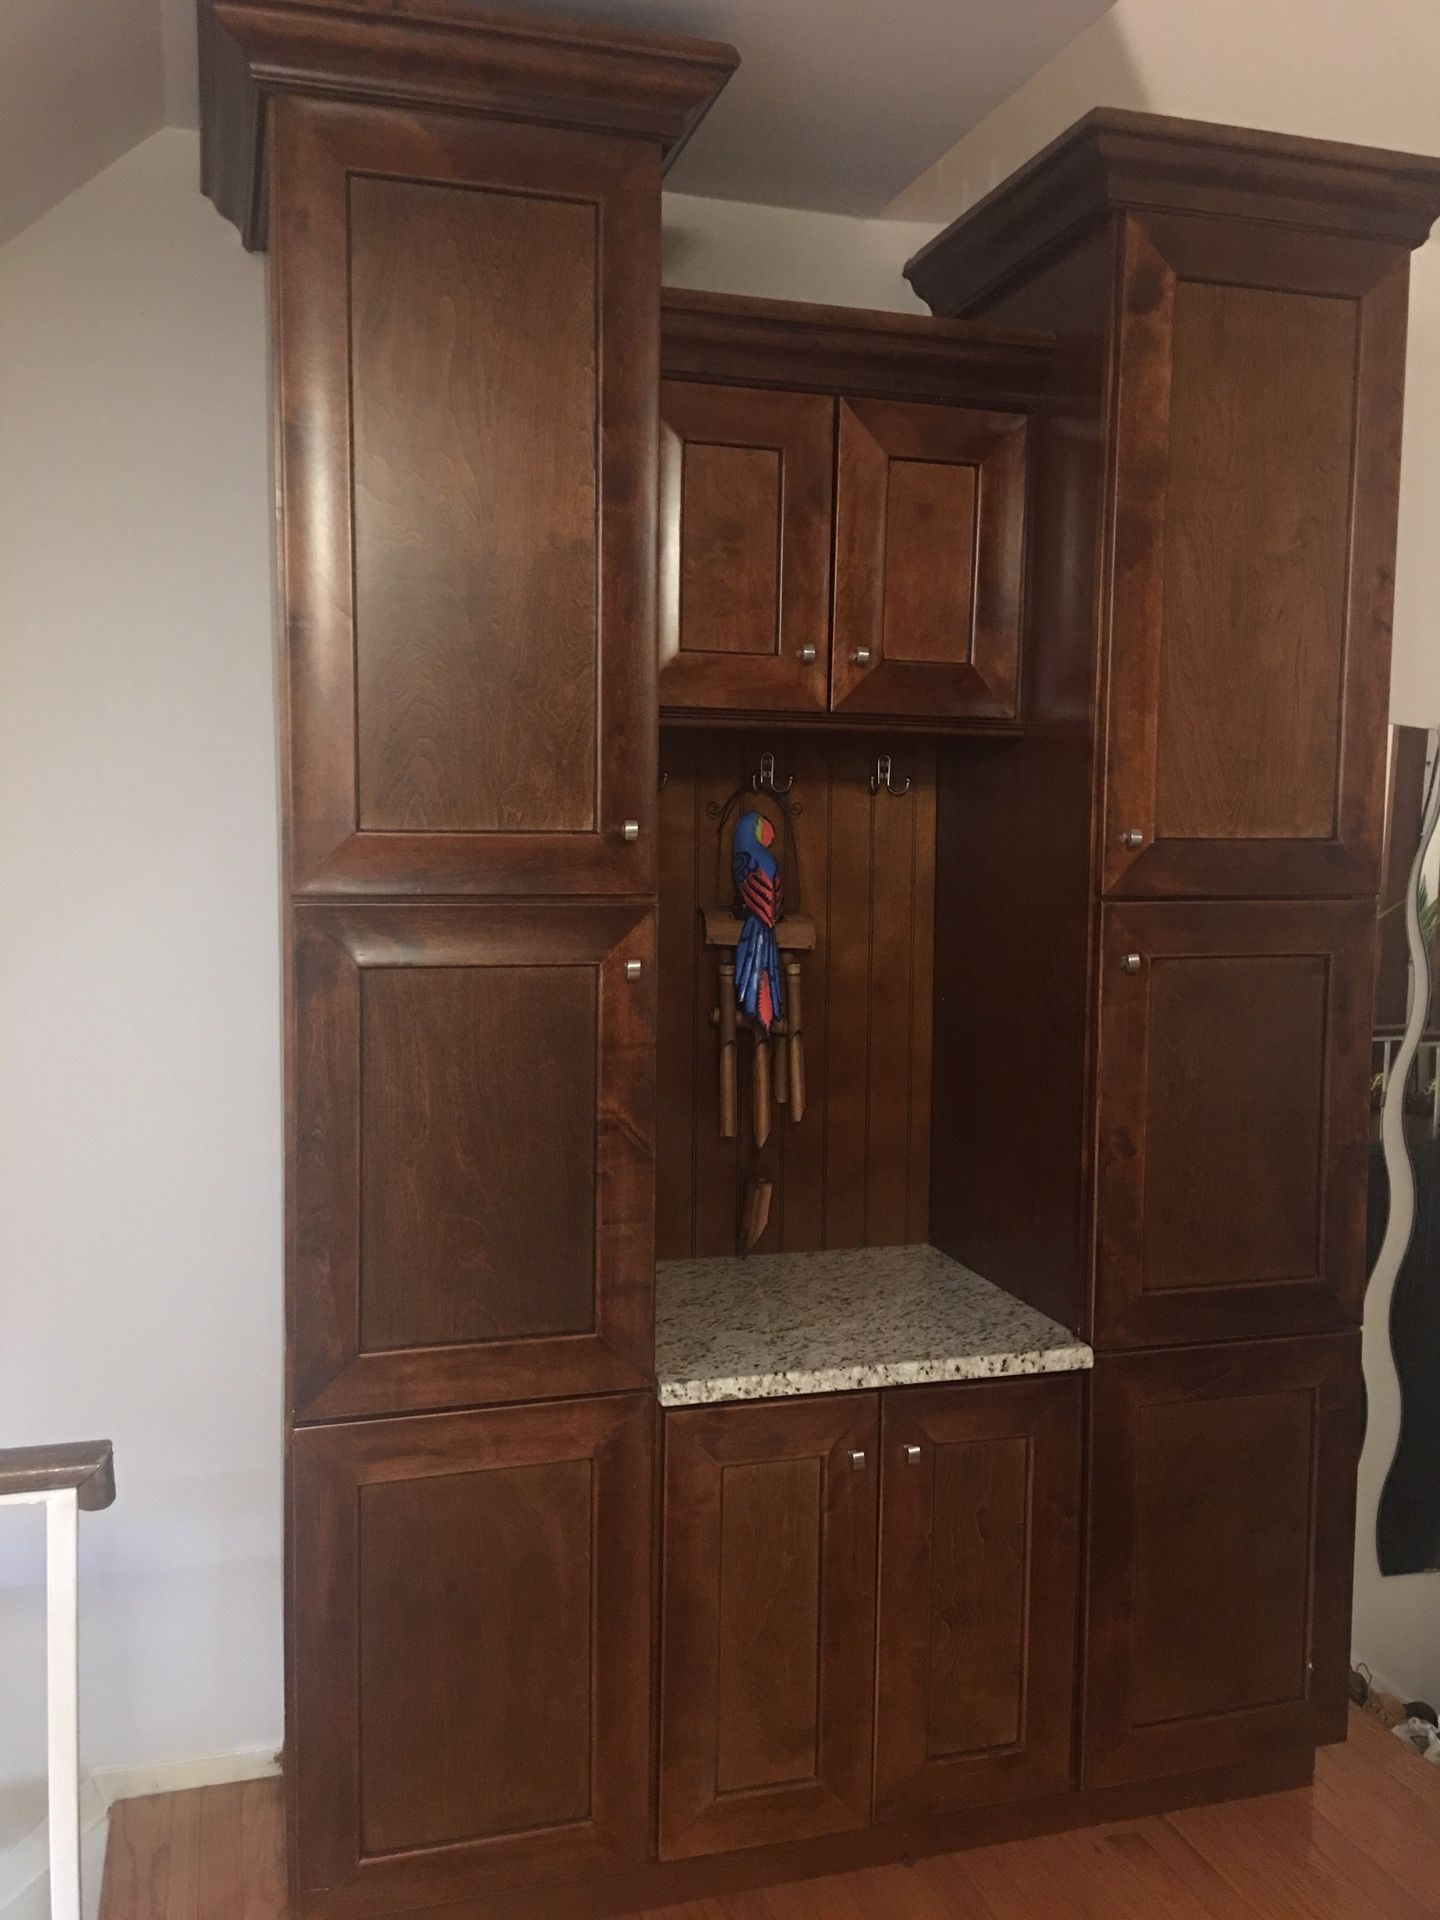 Mud room two pantry cabinets with granite counter top